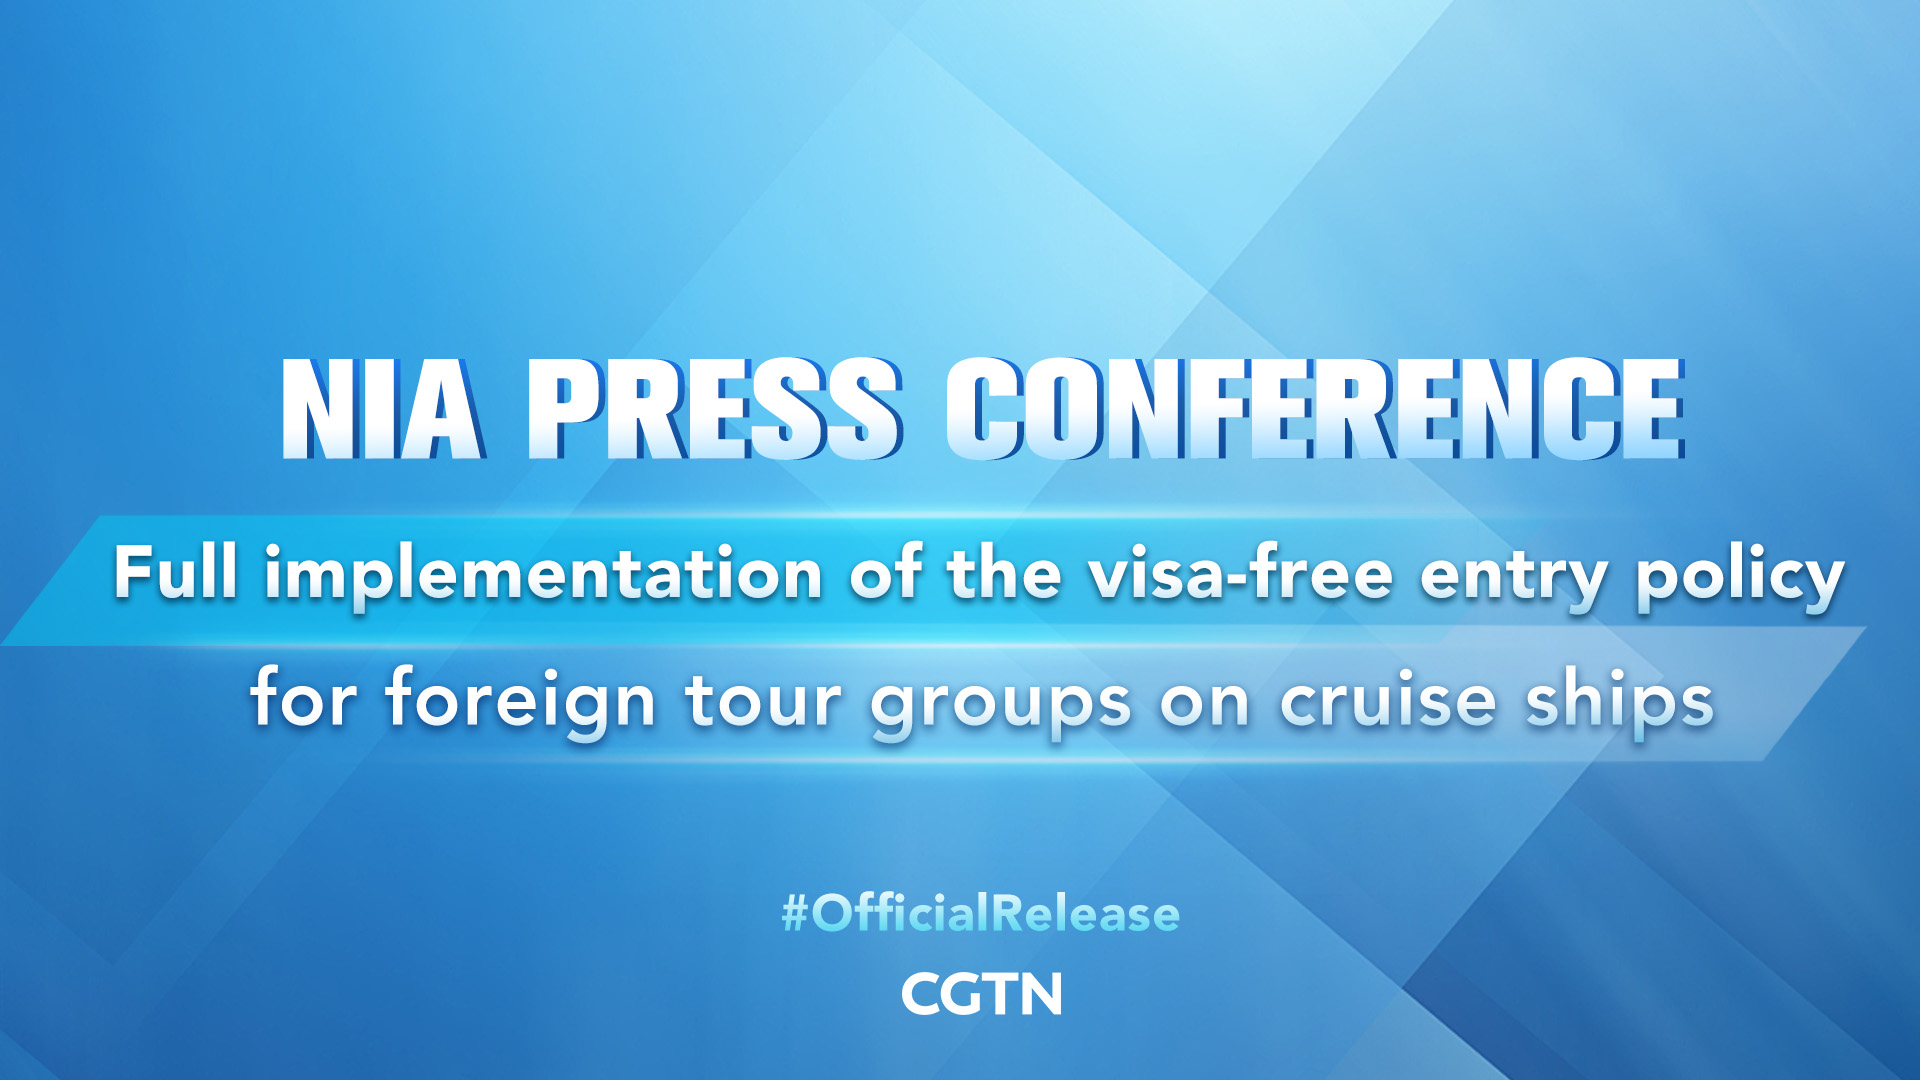 Live: Press conference on visa-free entry policy for foreign tour groups on cruise ships